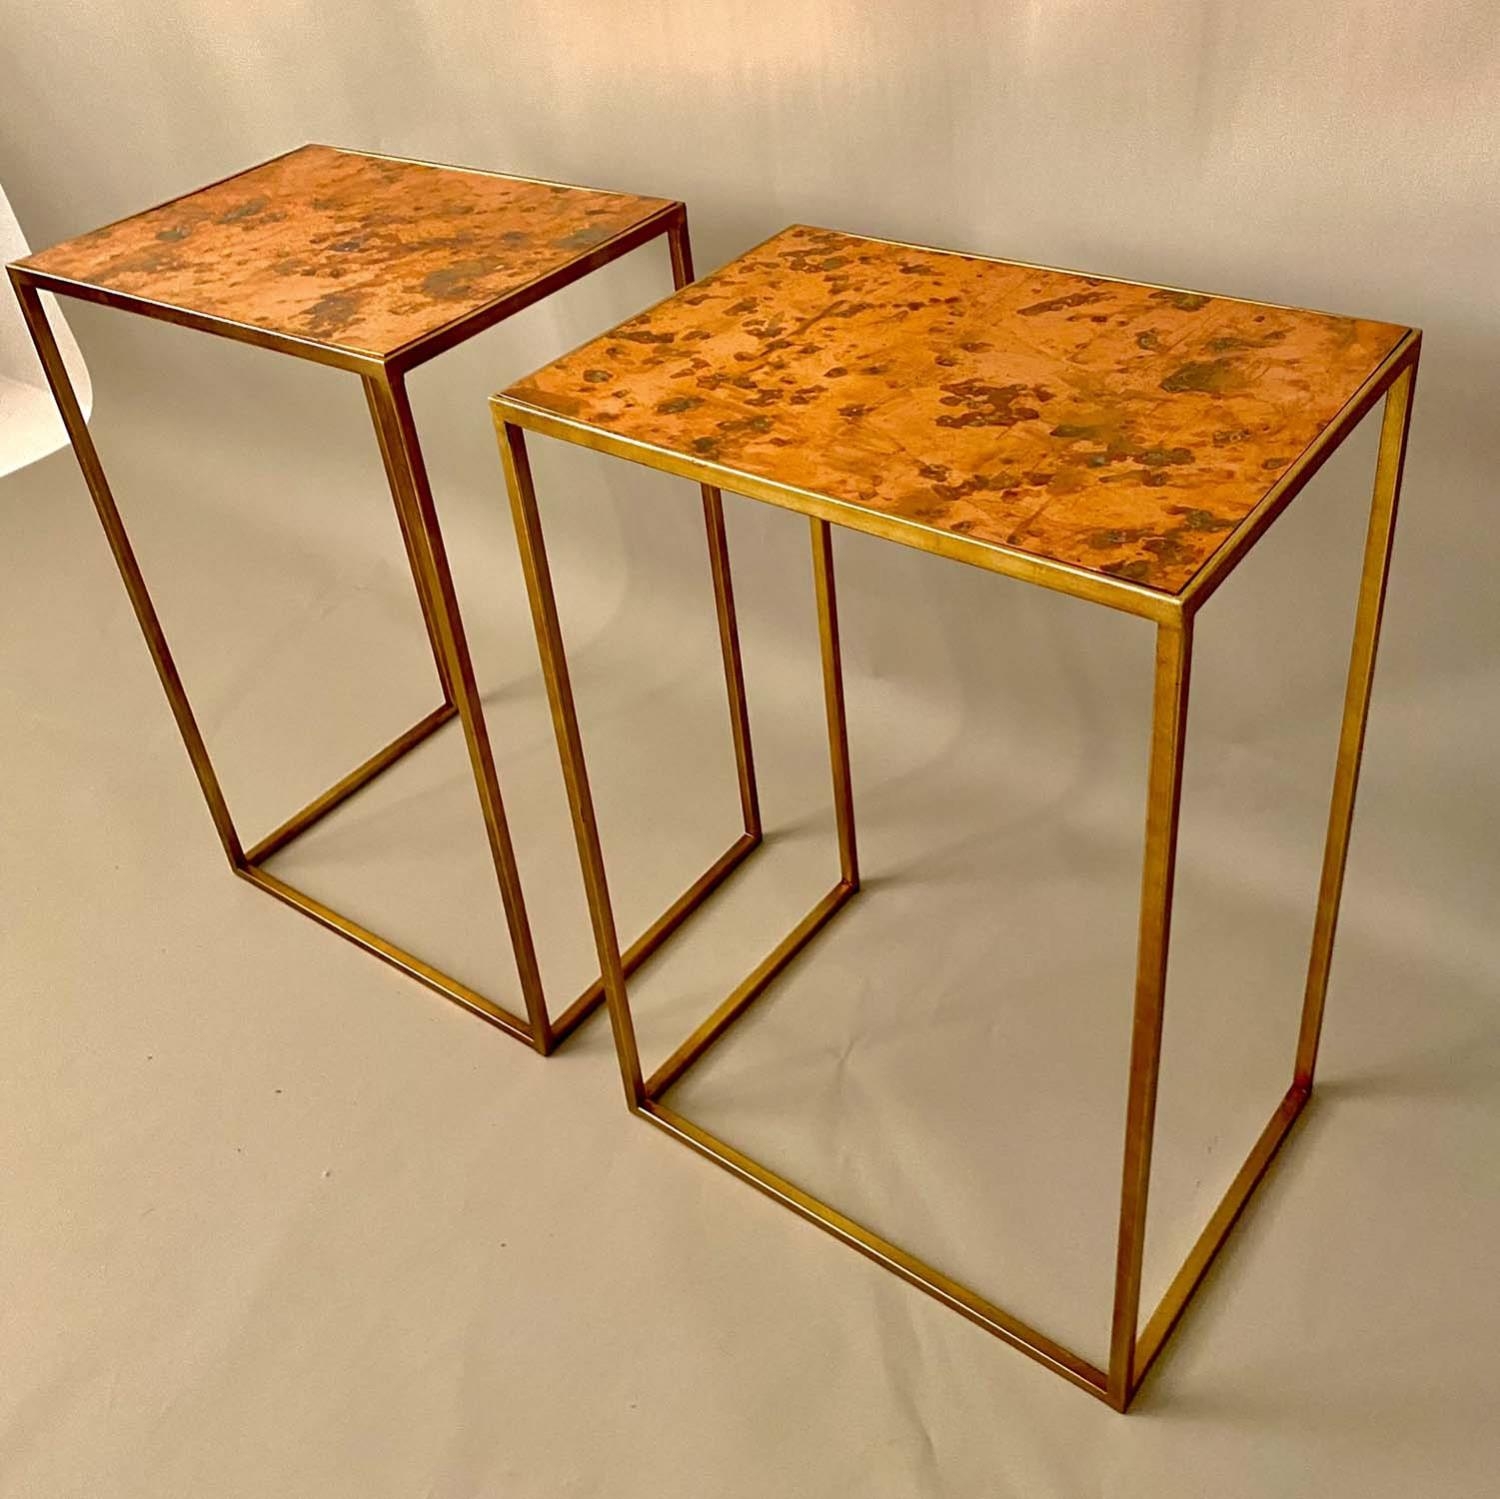 SIDE TABLES, pair, each measuring 70cm high, 46cm wide, 33cm deep, 1970s Italian style coppered tops - Image 2 of 4